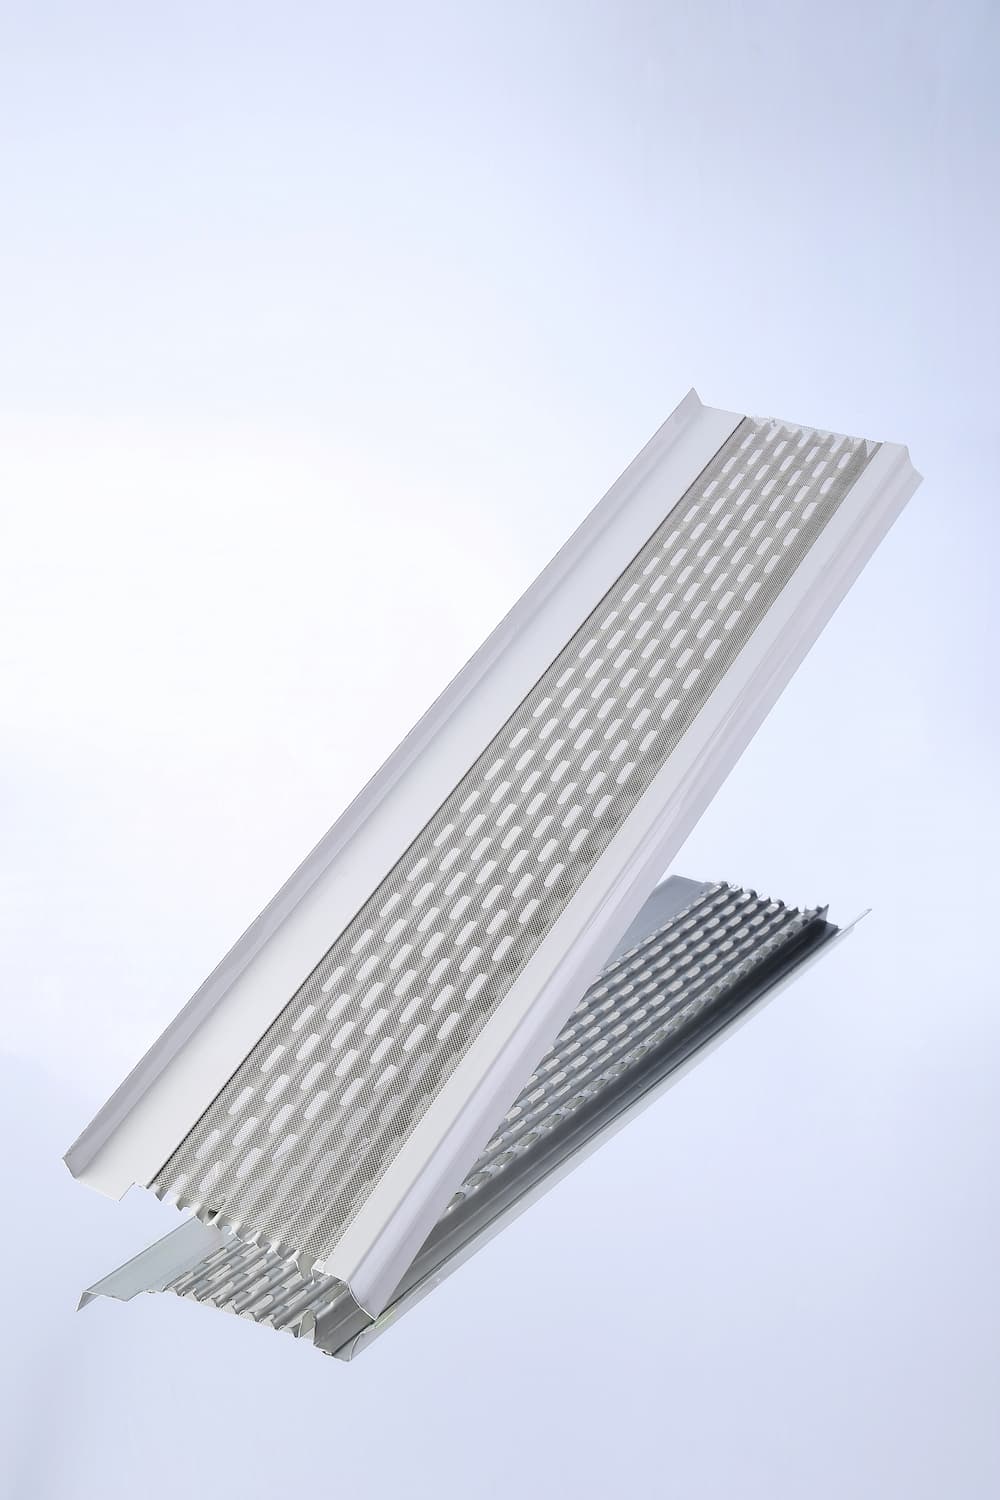 6 Inch Micromesh Gutter Guards